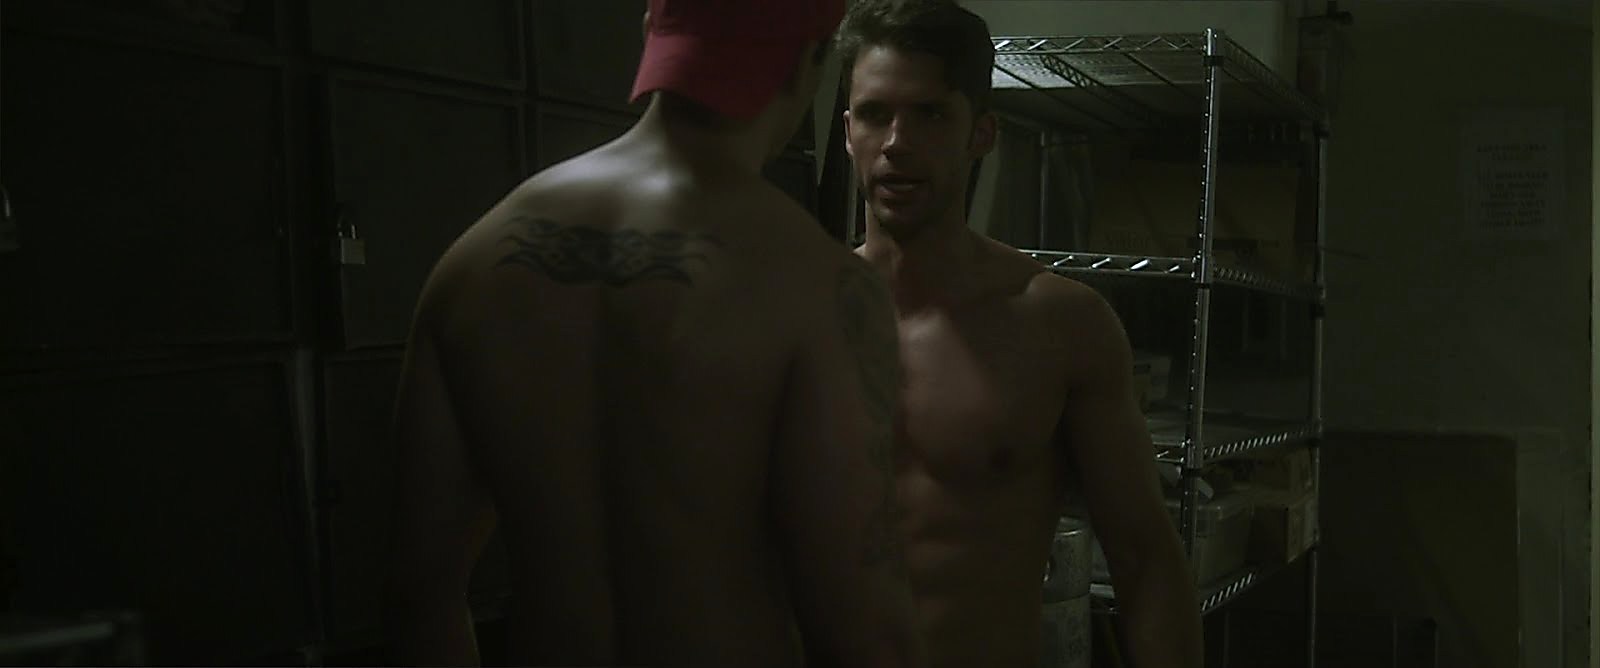 David A Gregory sexy shirtless scene July 16, 2018, 1pm